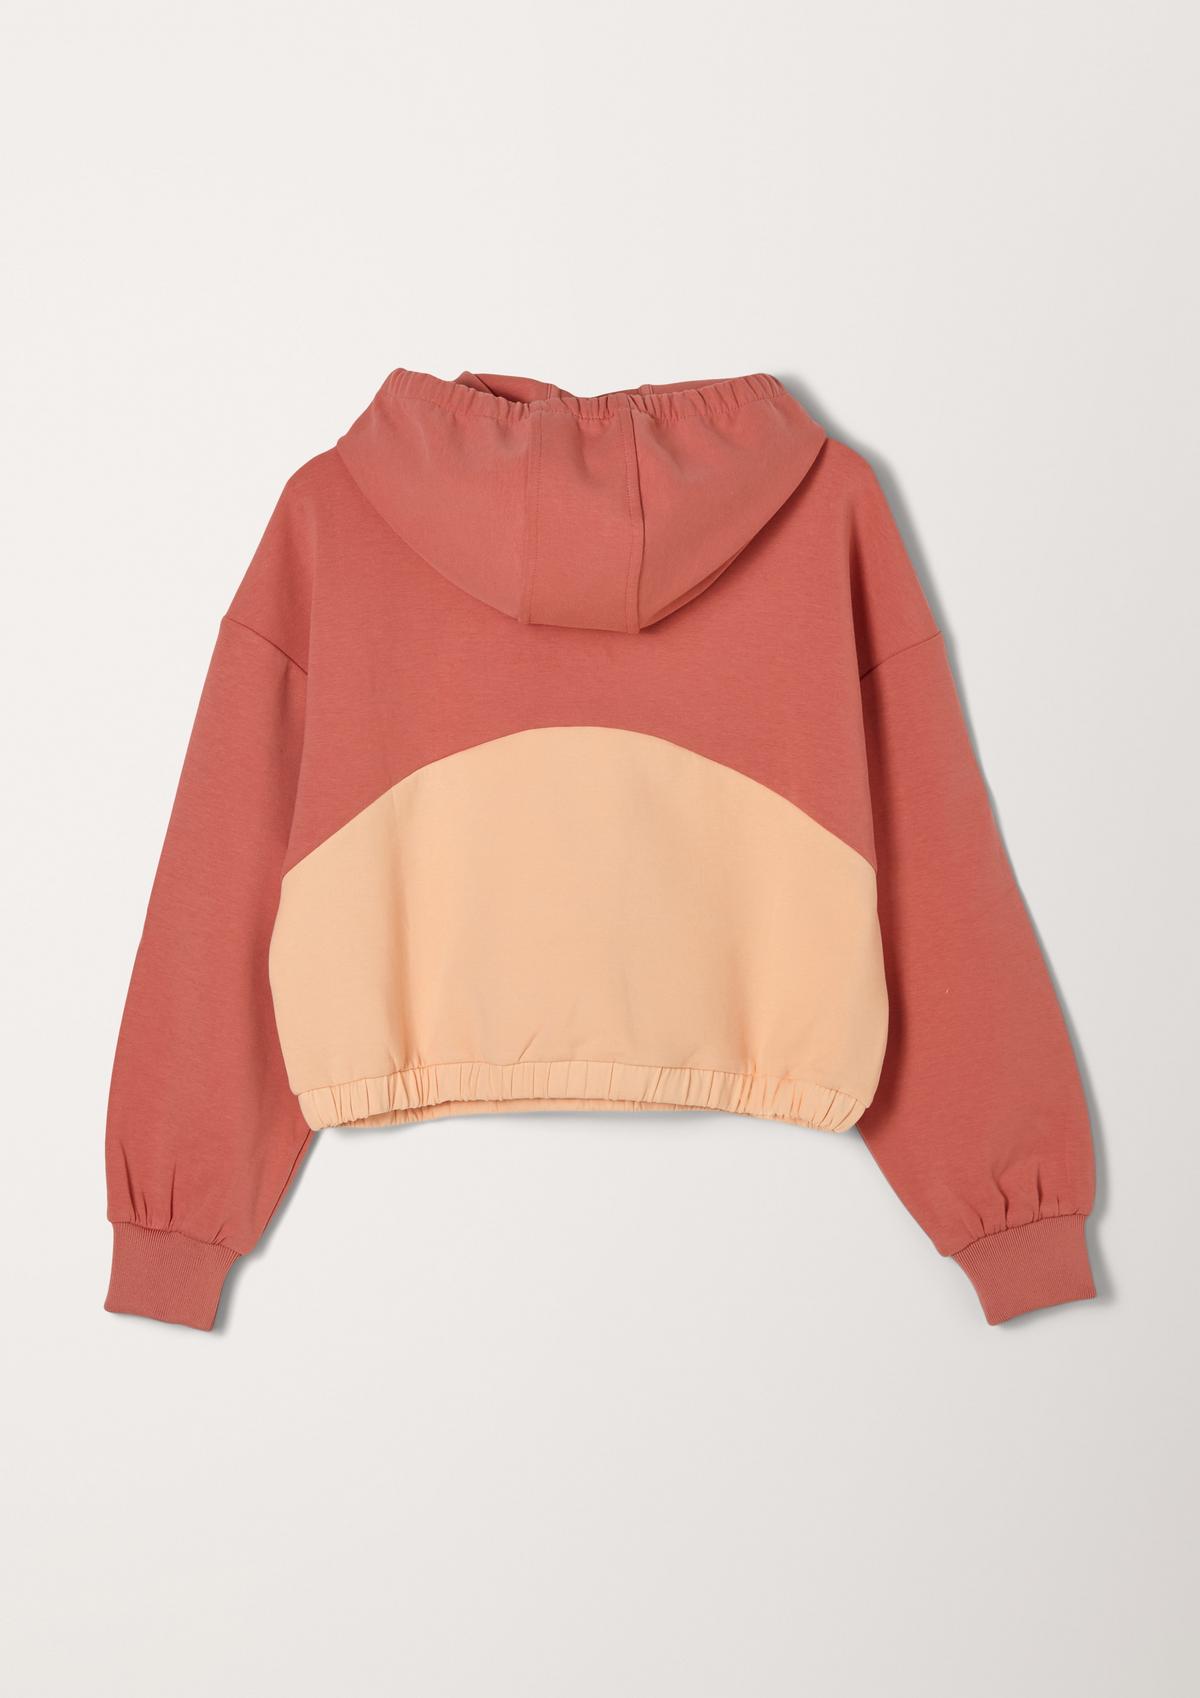 s.Oliver Hooded sweatshirt in a boxy look